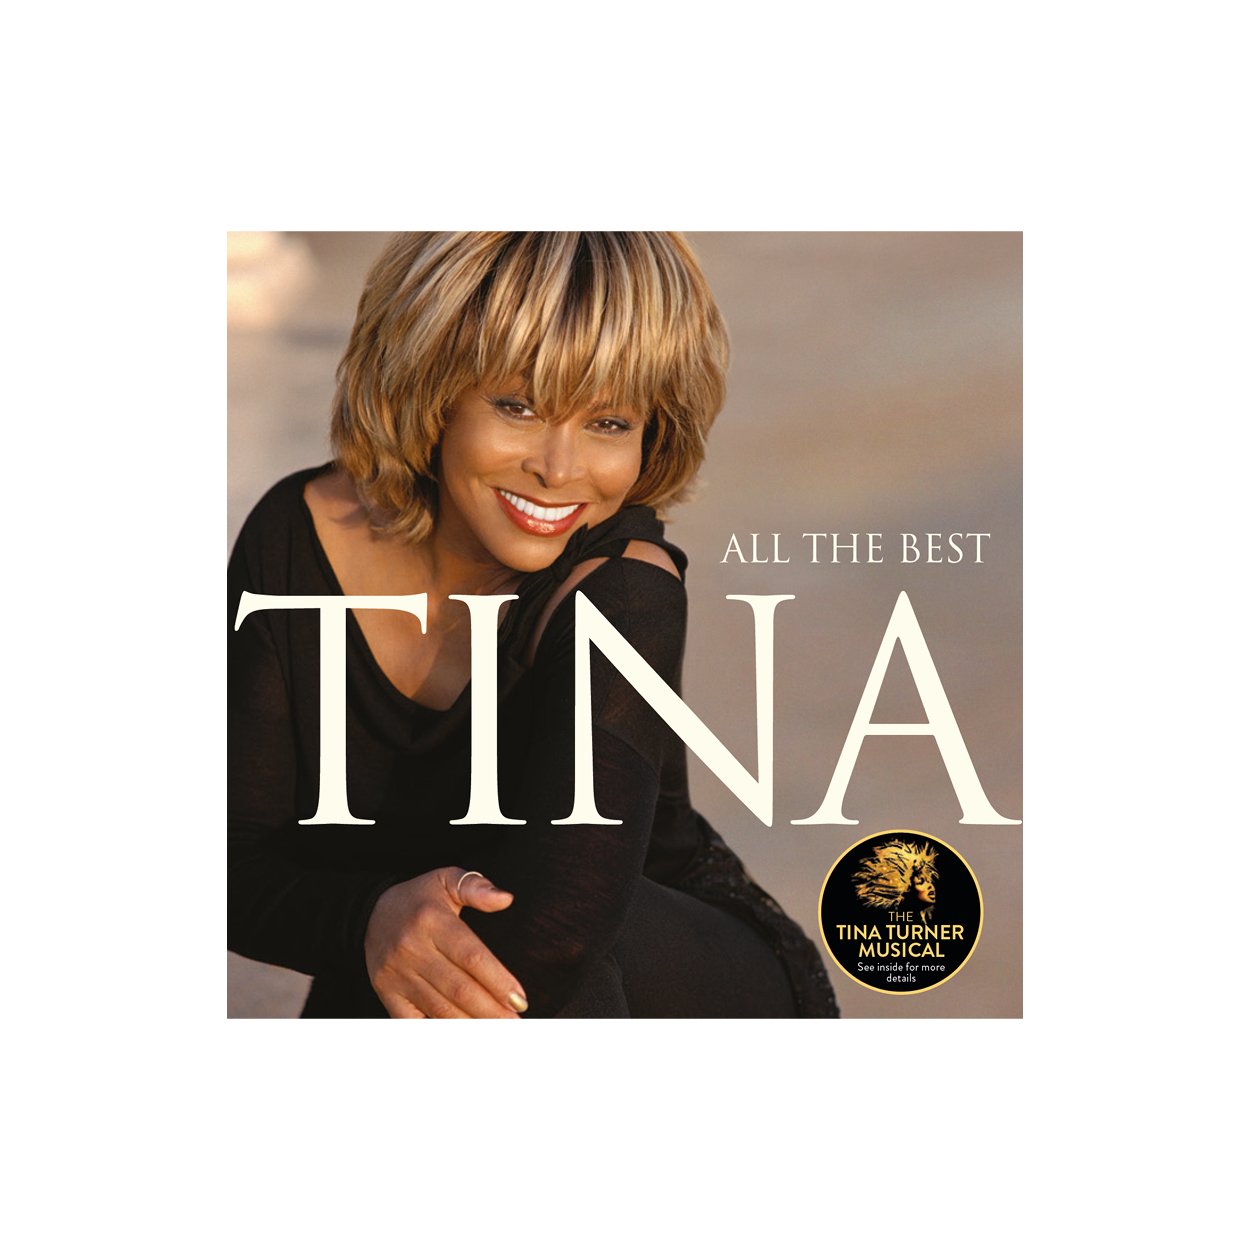 TINA - All the Best CD